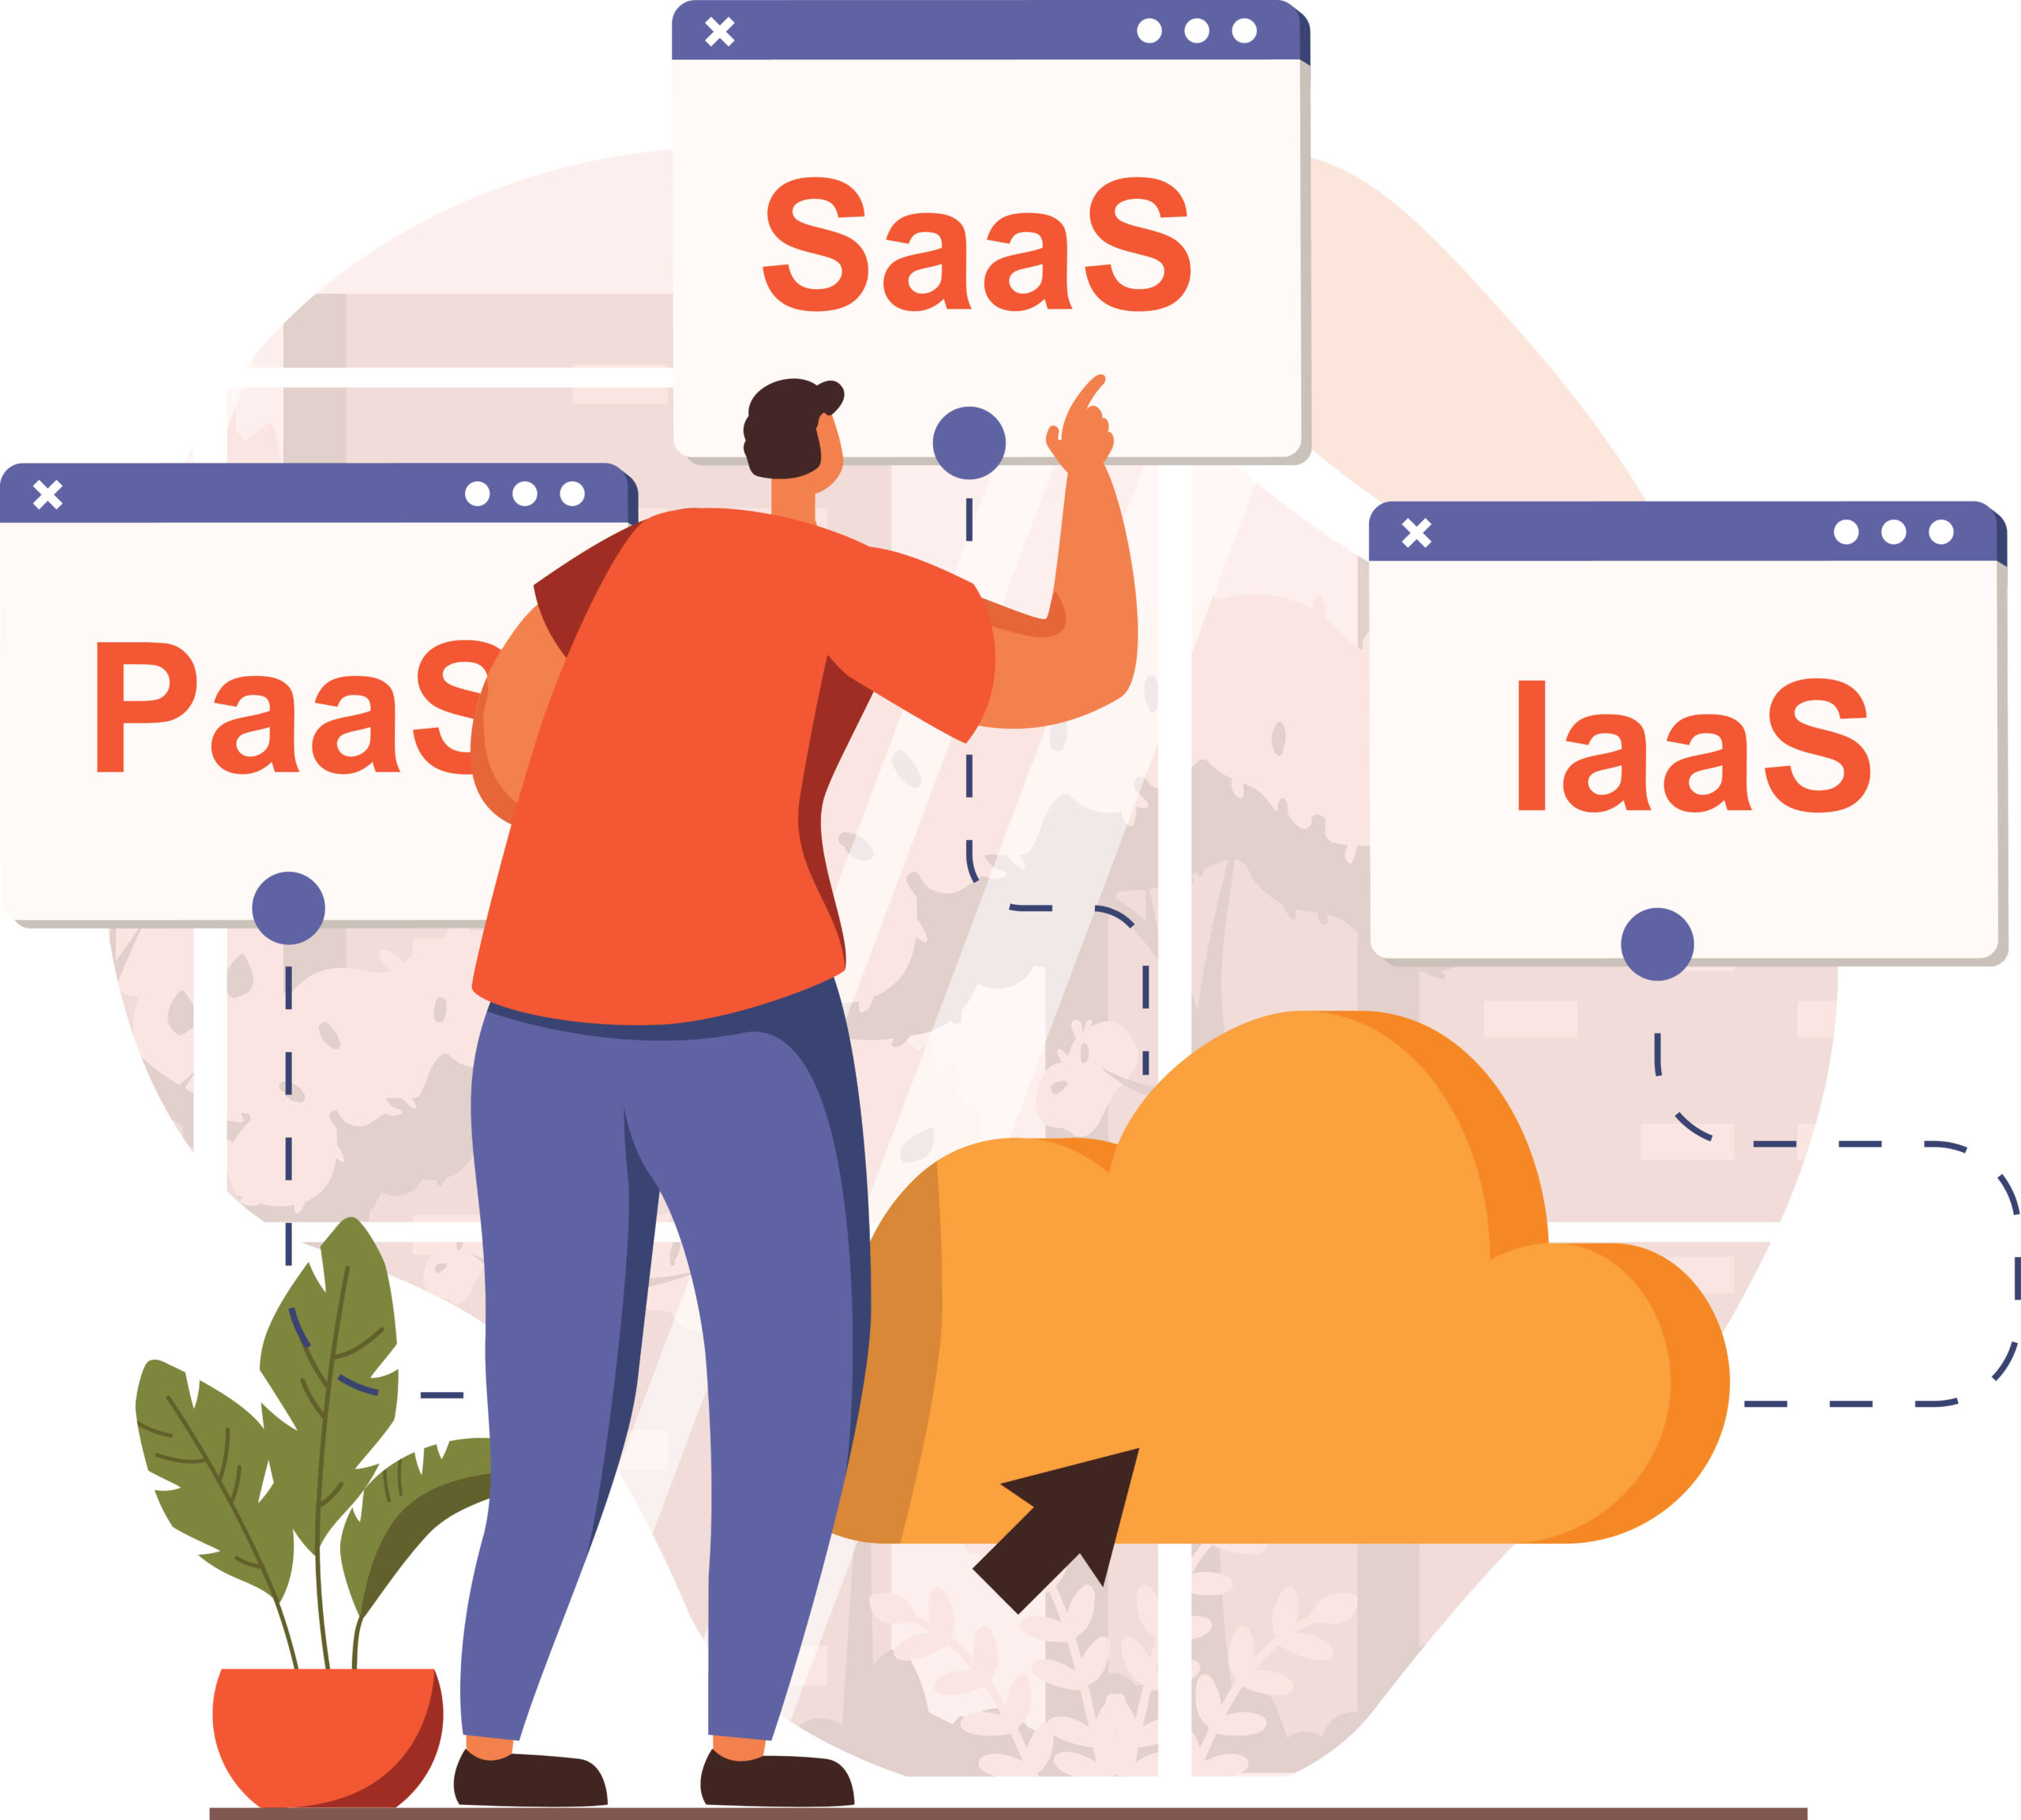 Software-as-a-Service (SaaS) Infrastructure-as-a-Service (IaaS) Platform-as-a-Service (PaaS)